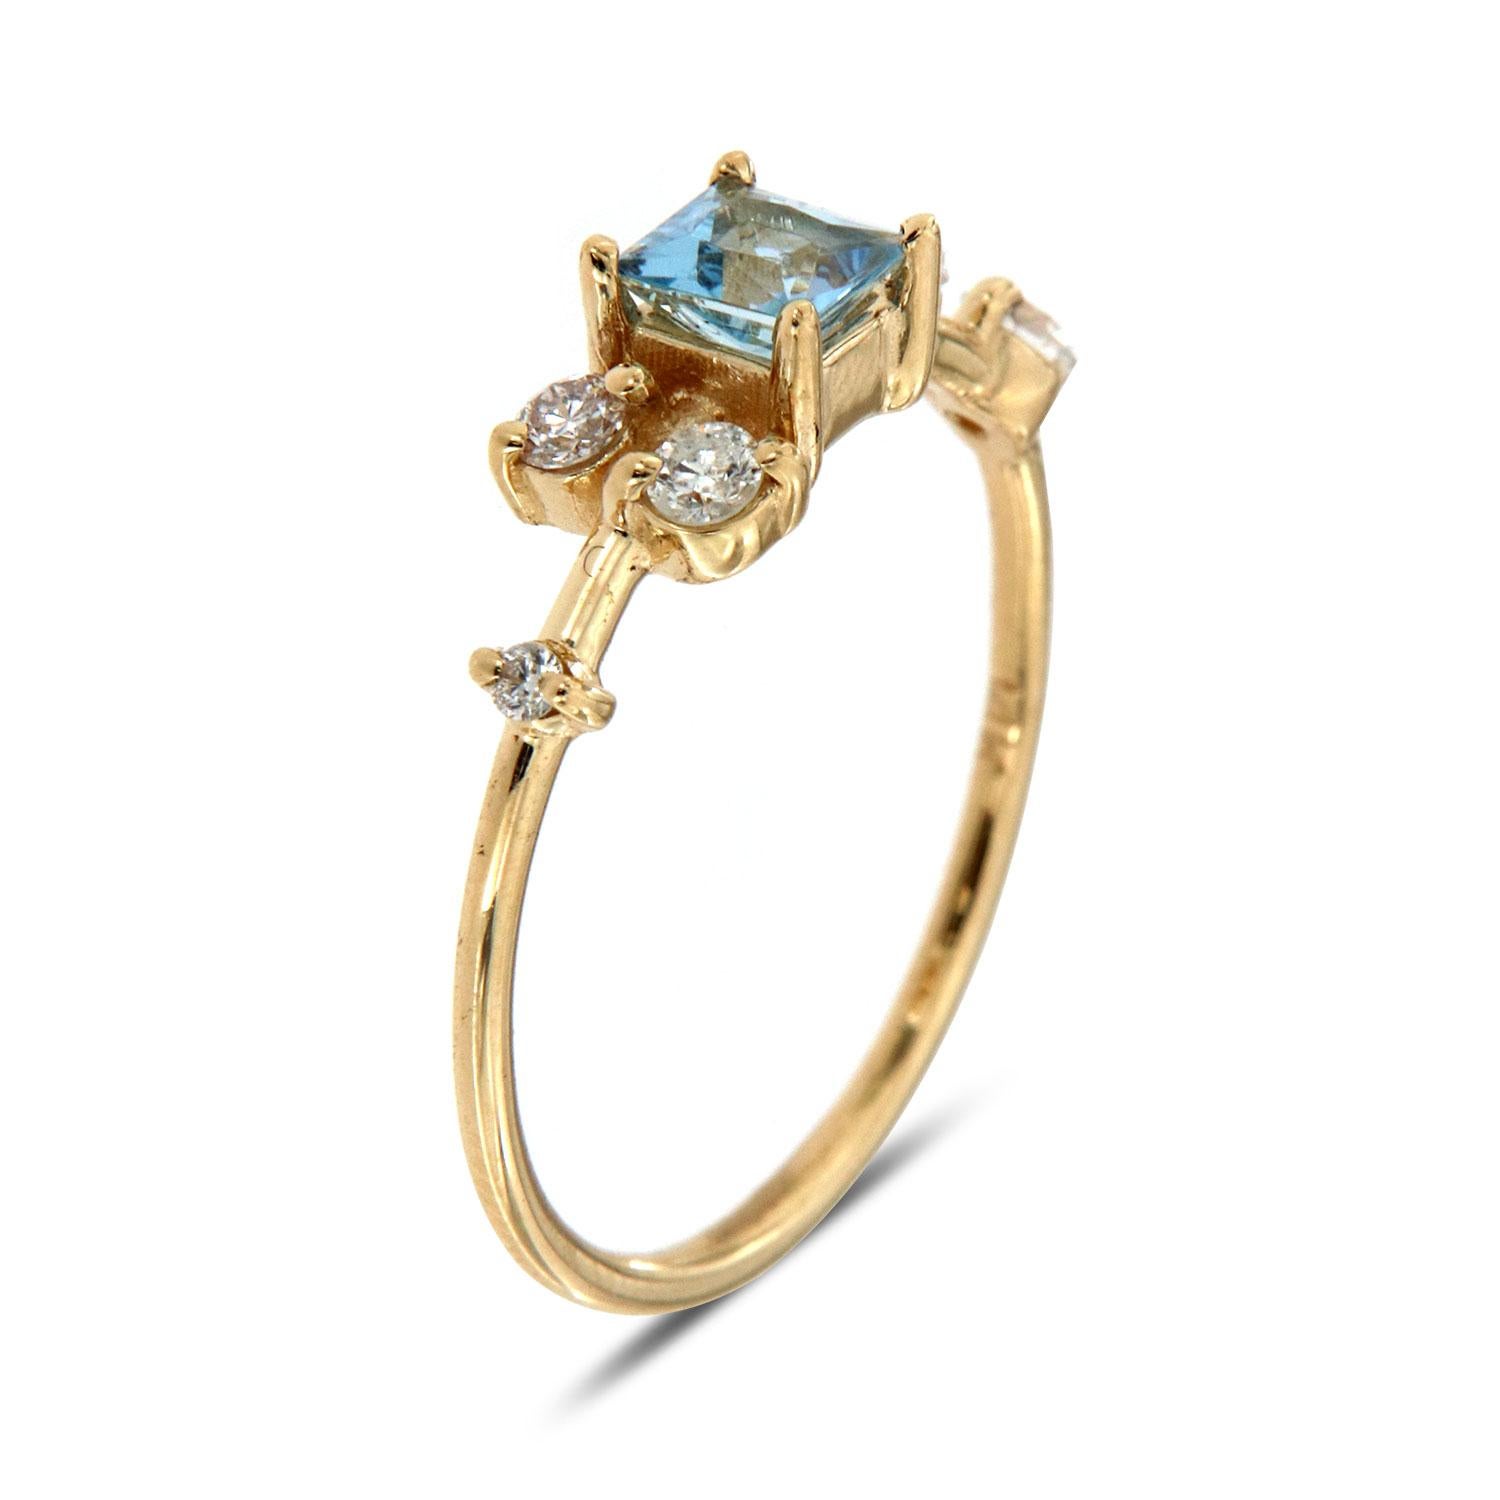 This petite ring features five (5) round brilliant diamonds scattered on top of a delicate 1.2 mm band. A perfectly square 0.28 Teal Color Sapphire is placed in the center of this organically designed ring band. Experience the difference in